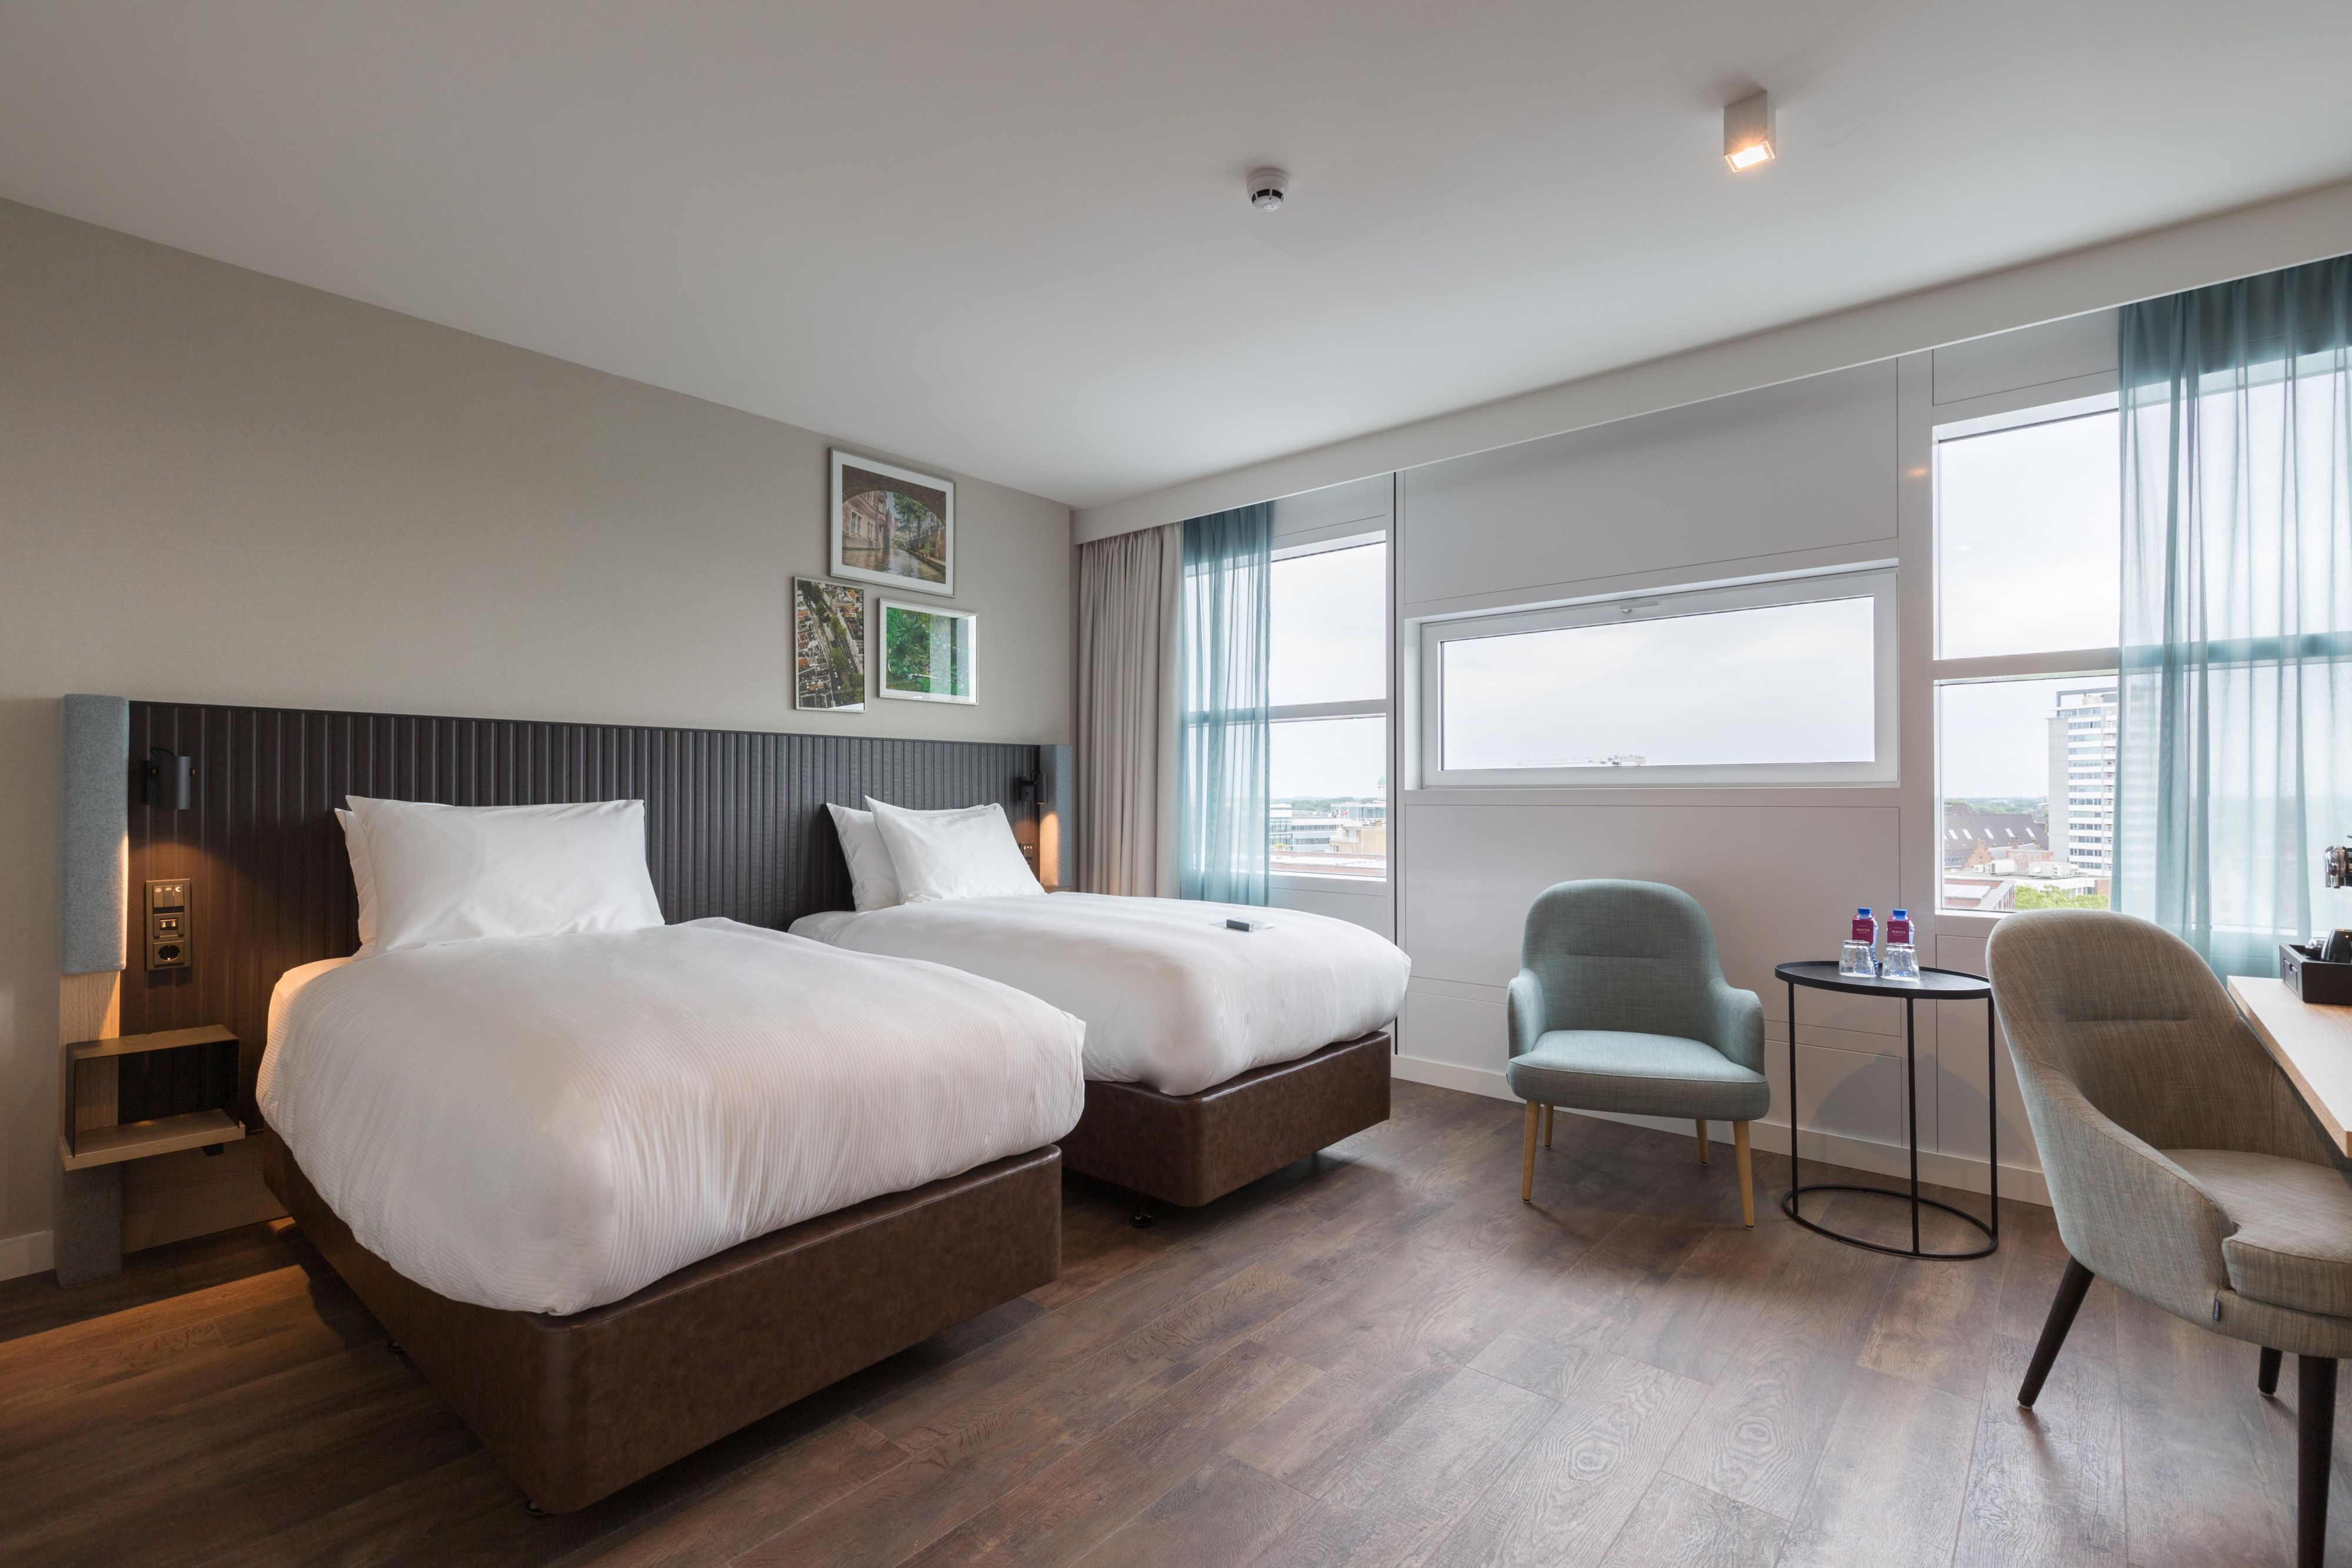 We offer connecting rooms upon request, great for a familiy stay.